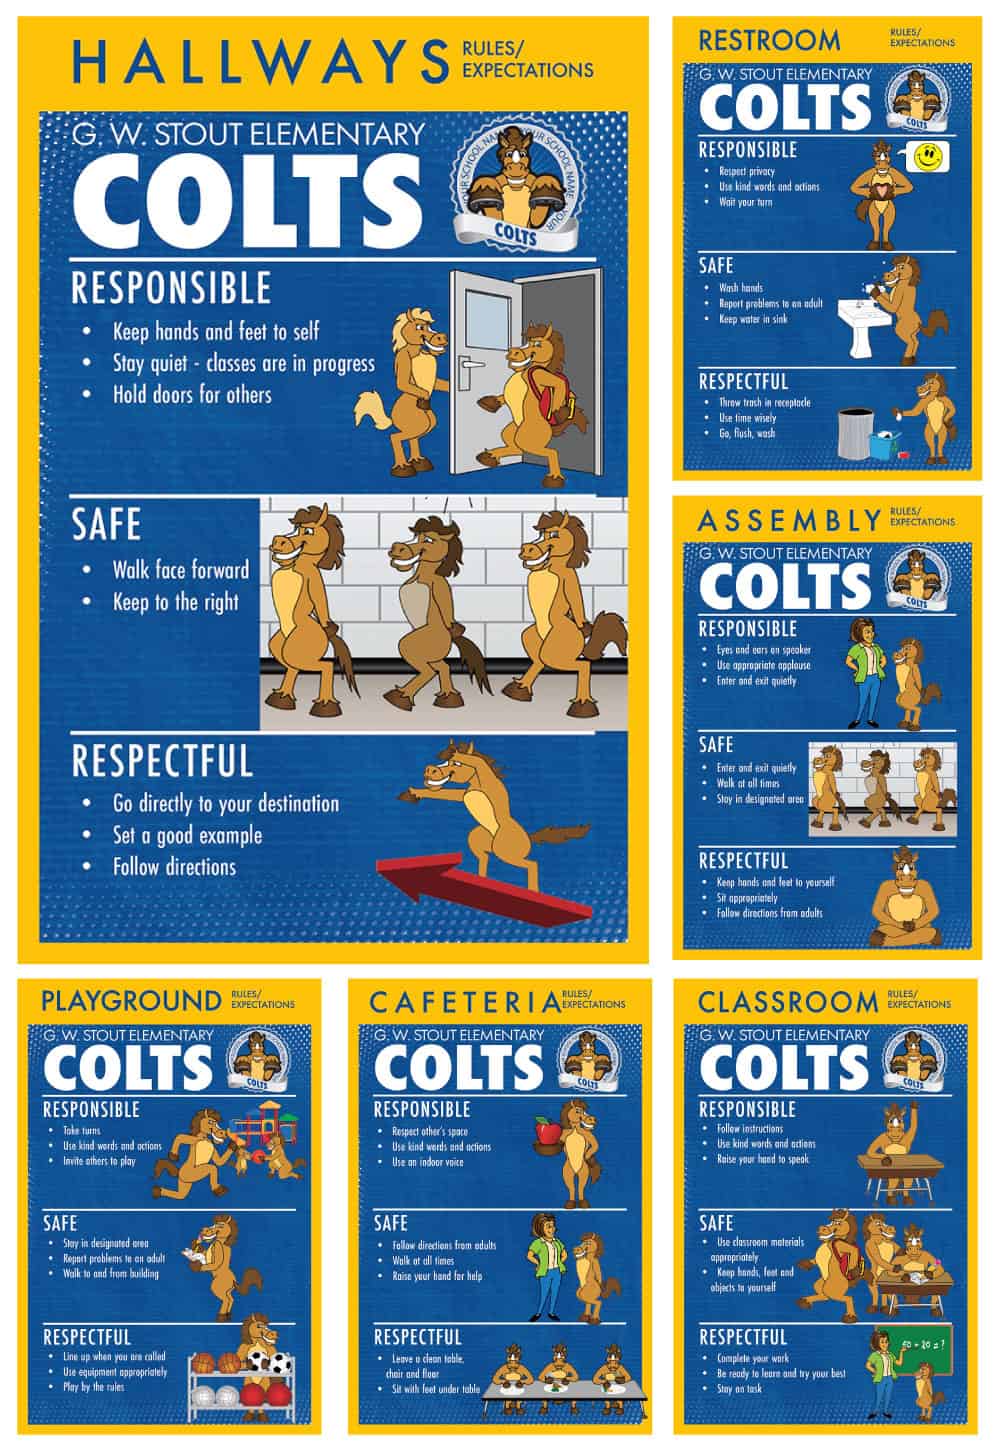 Rules-Poster-colts